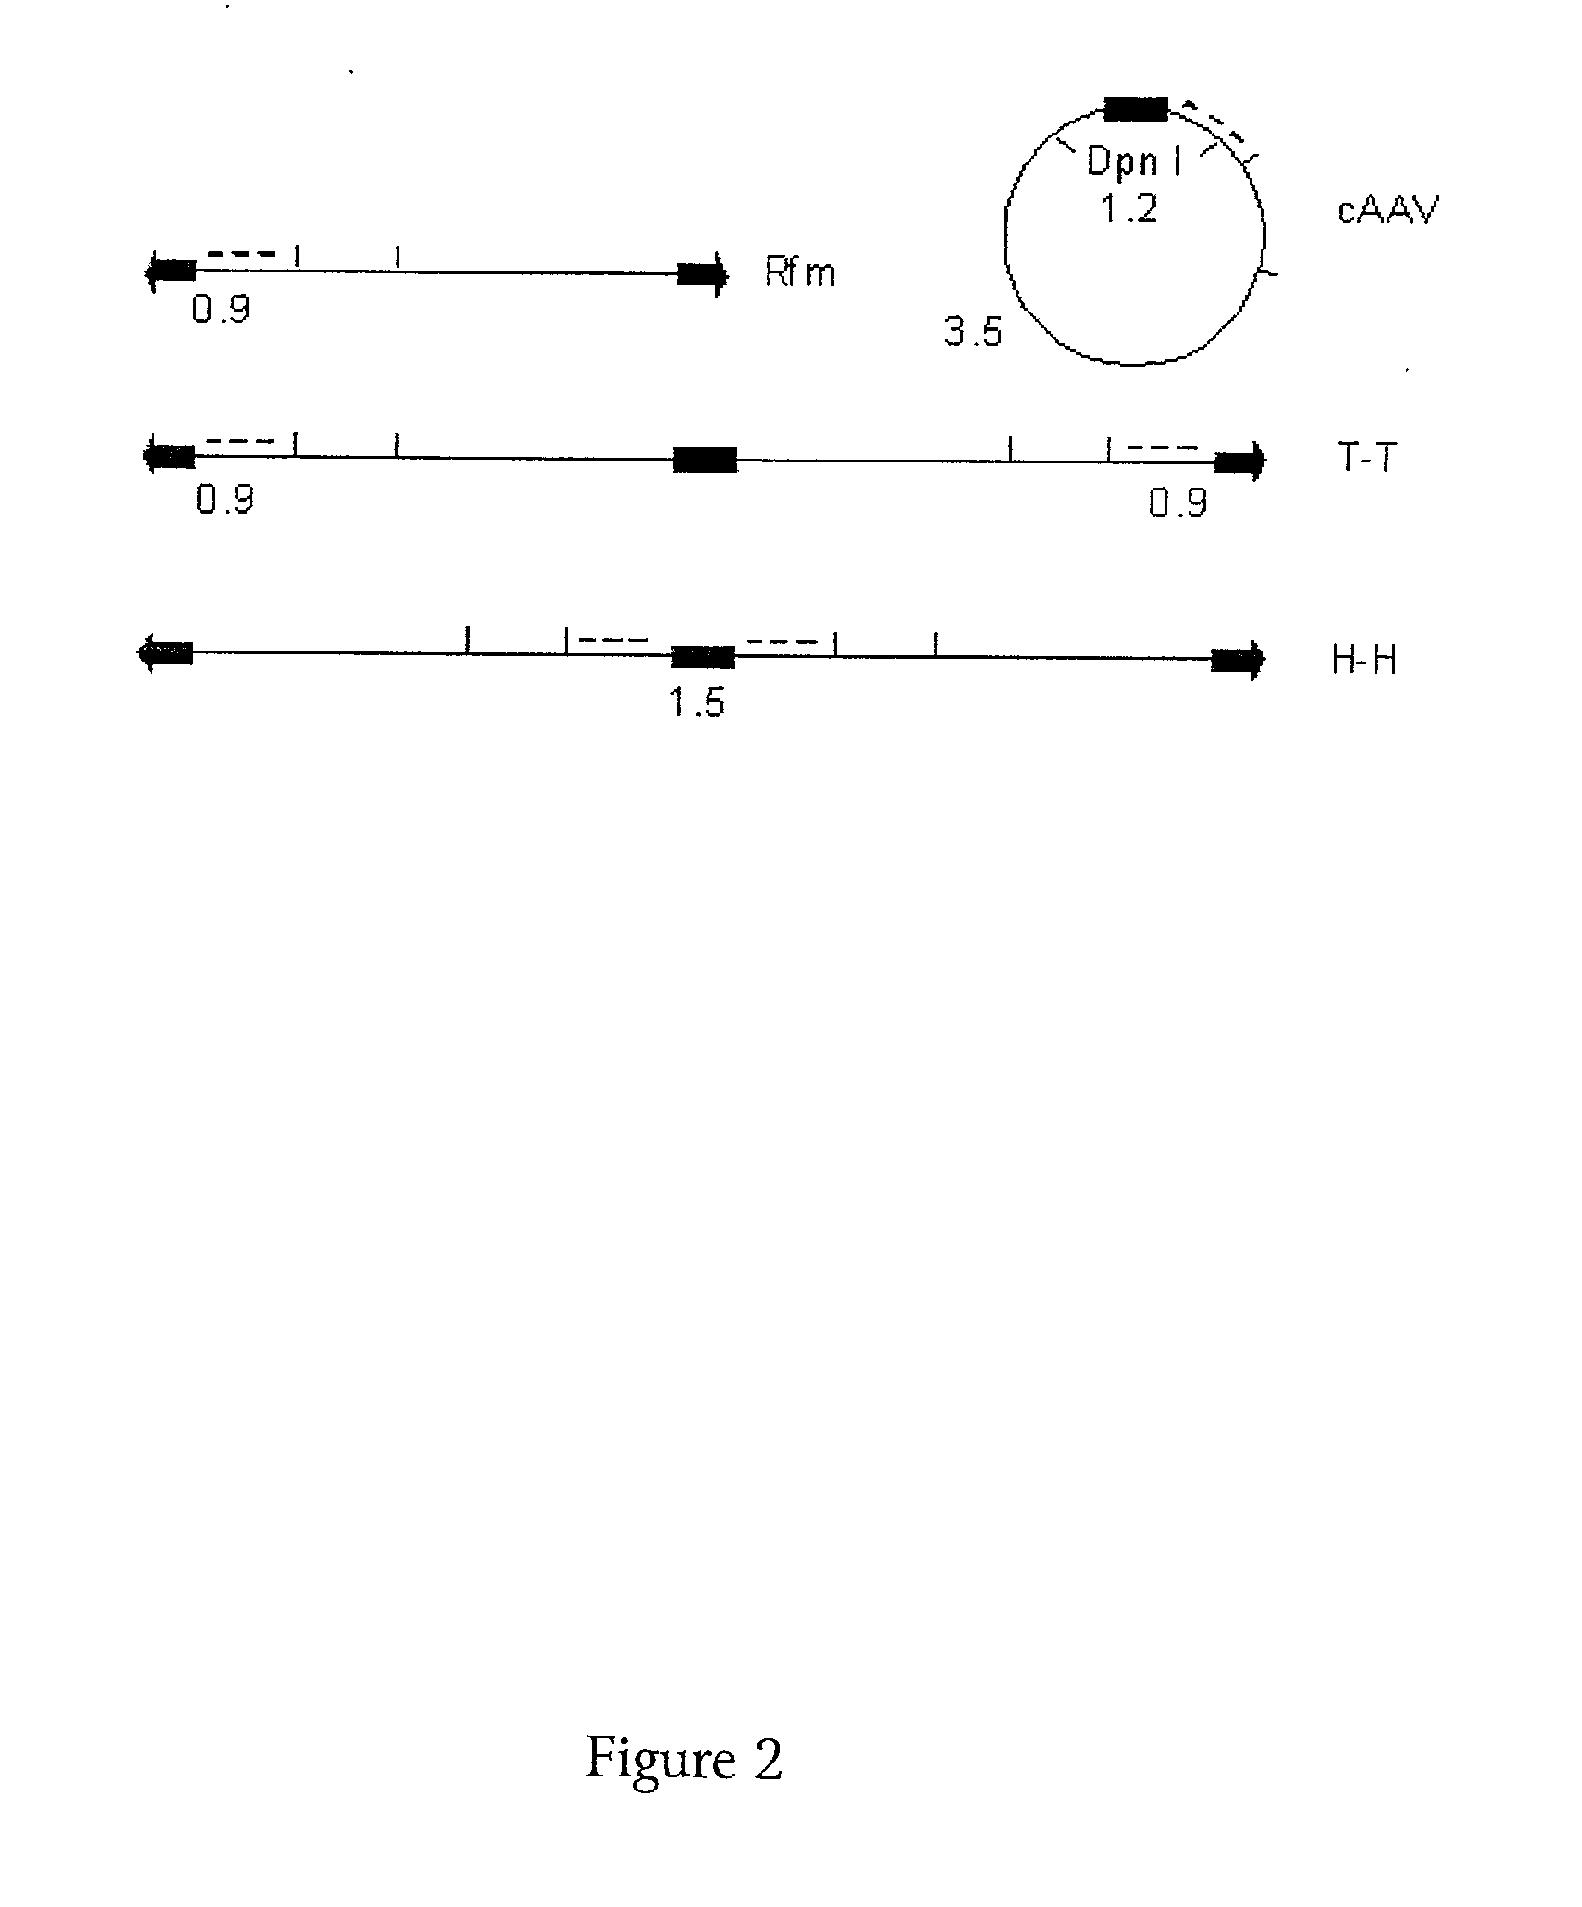 Method for generating replication defective viral vectors that are helper free